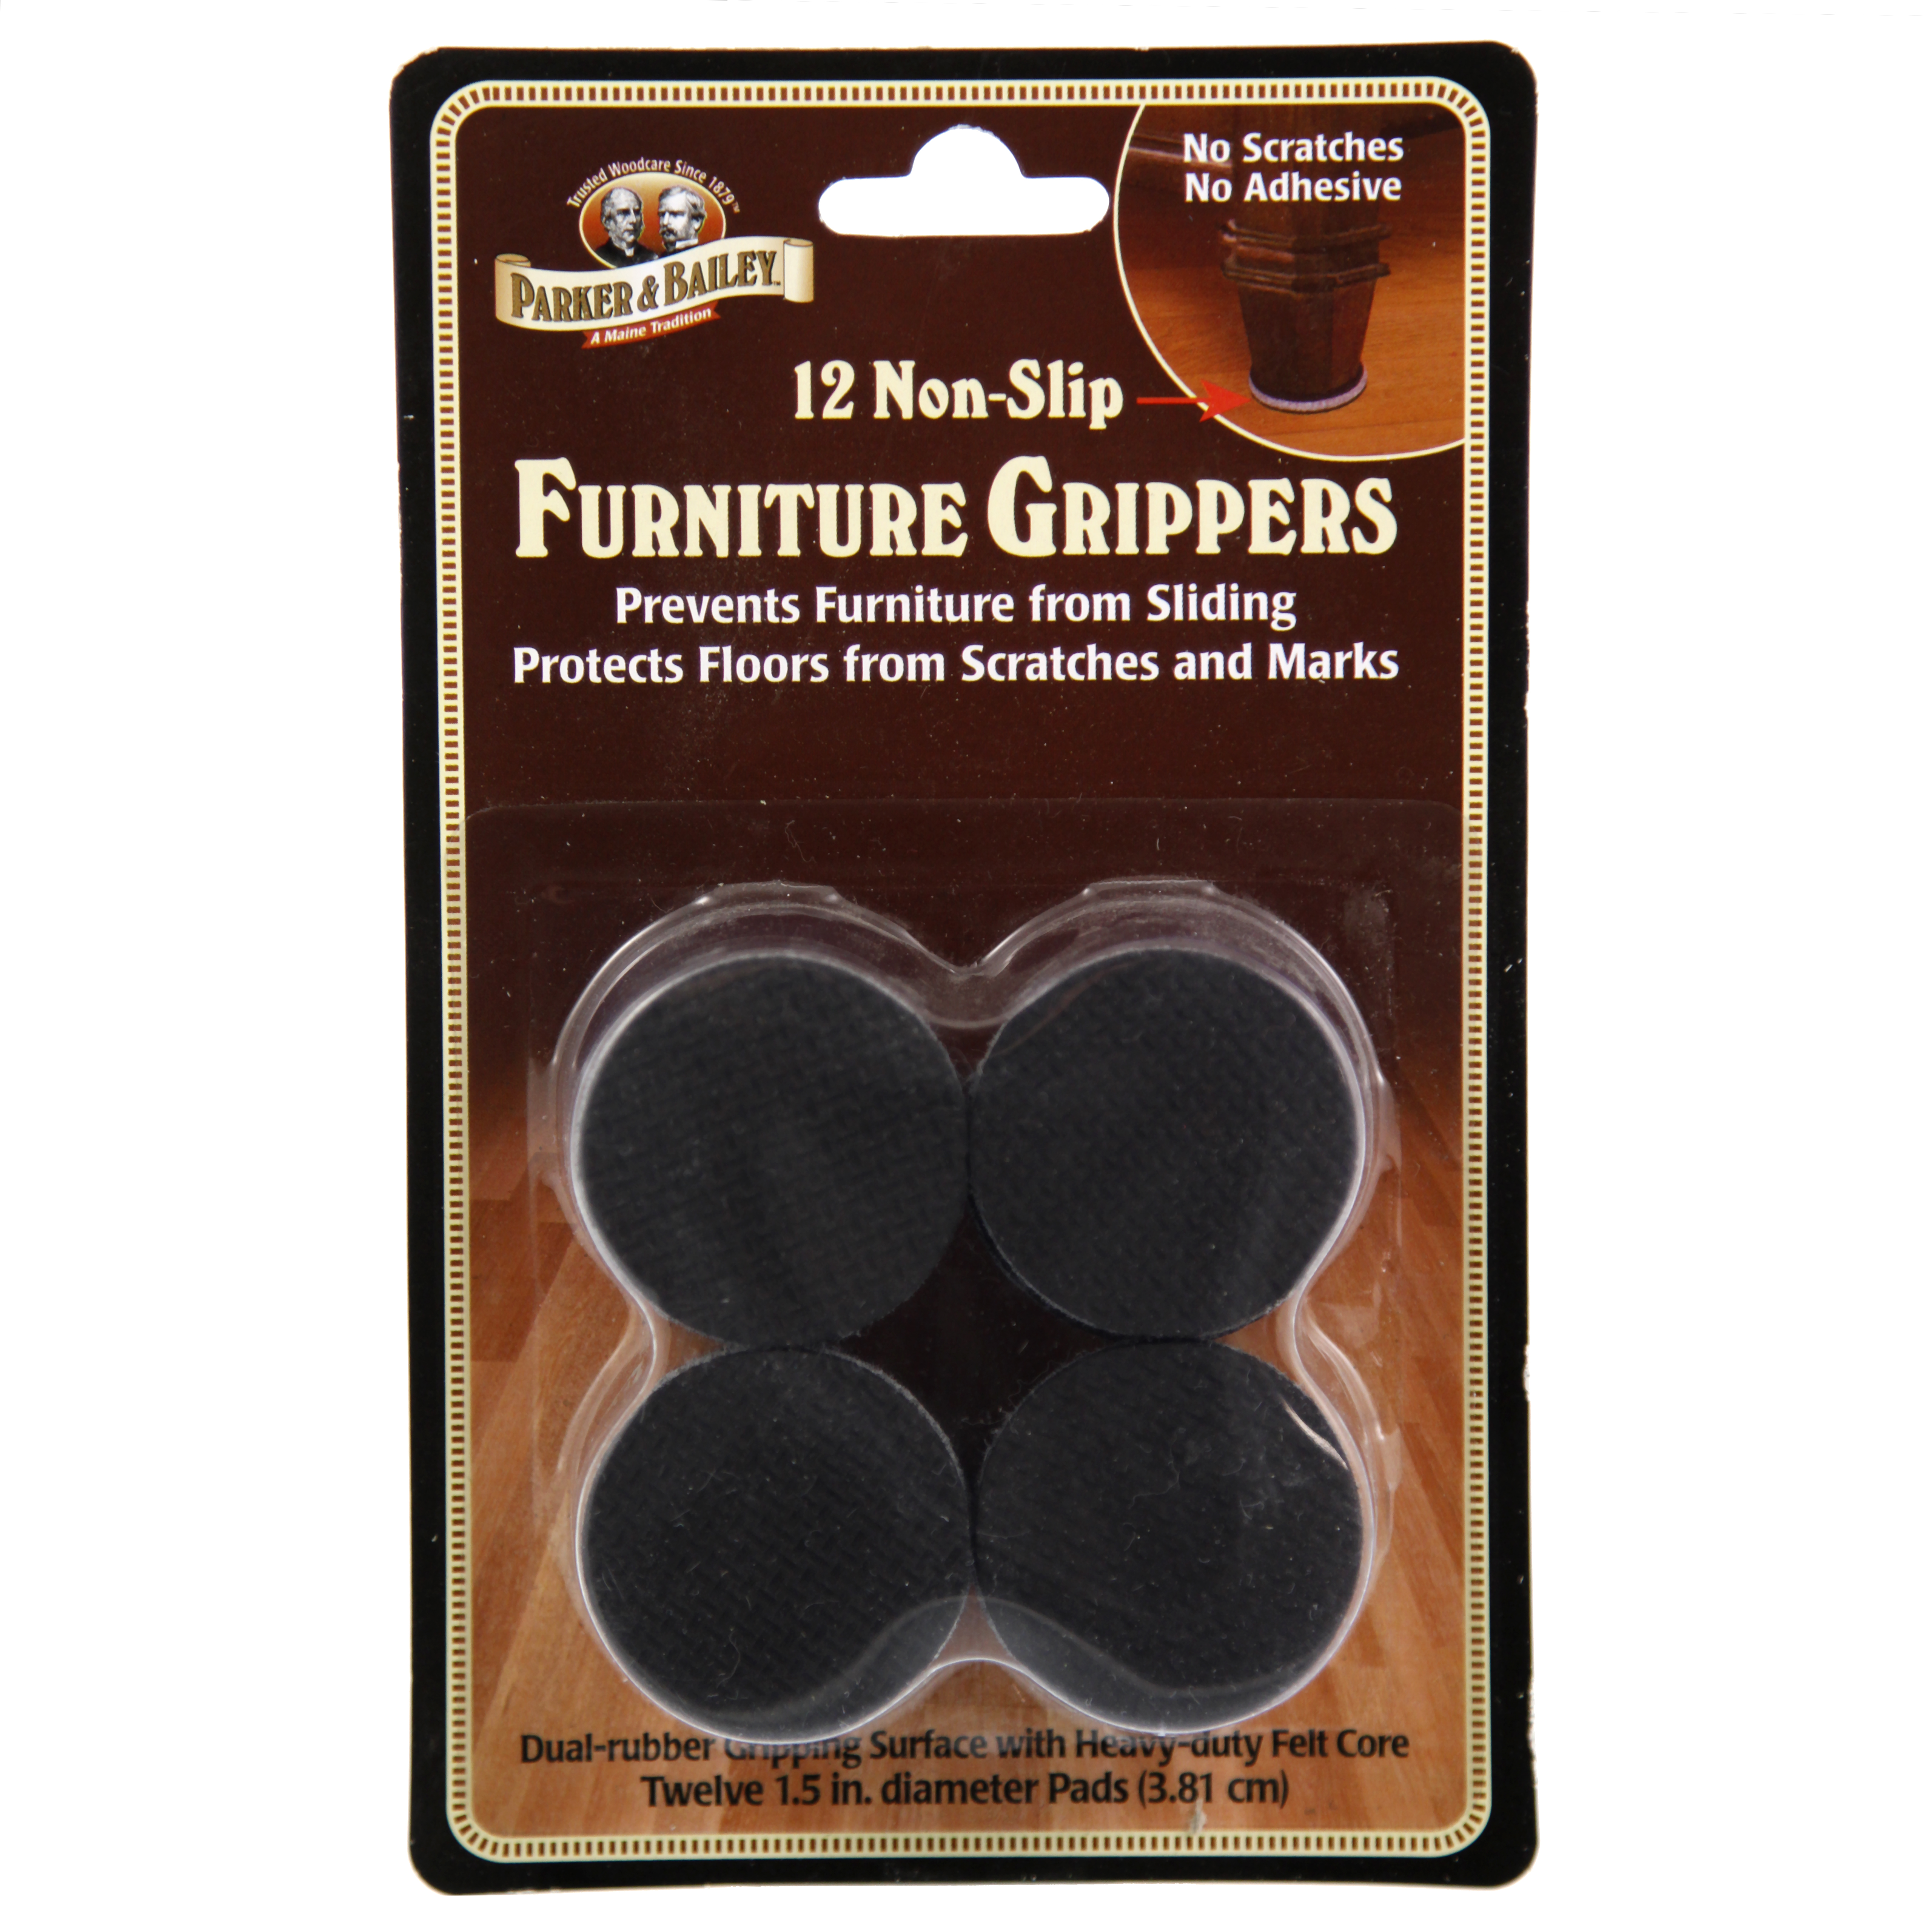 Nonslip Furniture Grippers 12 Pack Home Store More